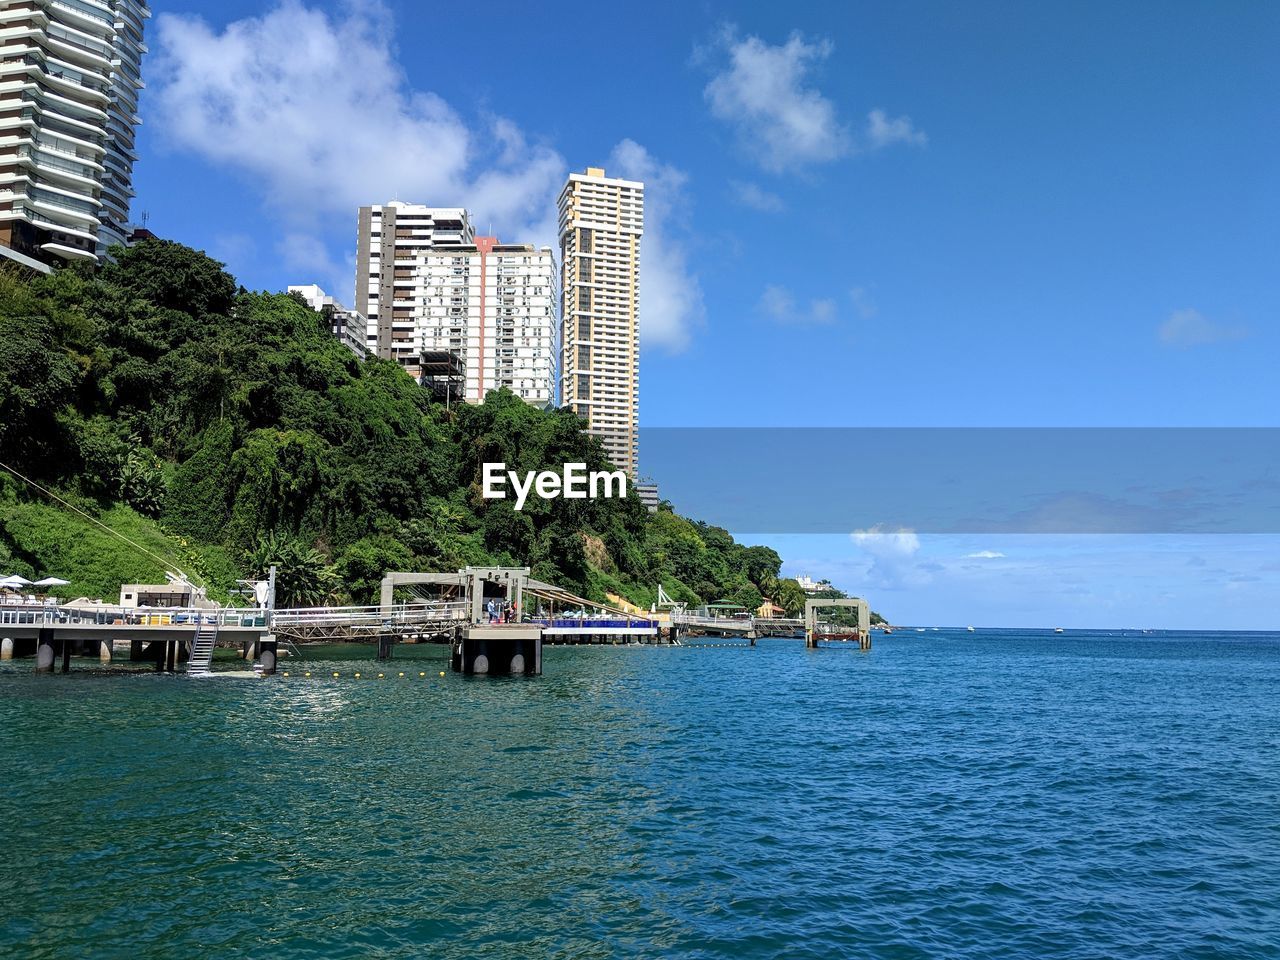 SCENIC VIEW OF SEA AGAINST BUILDINGS